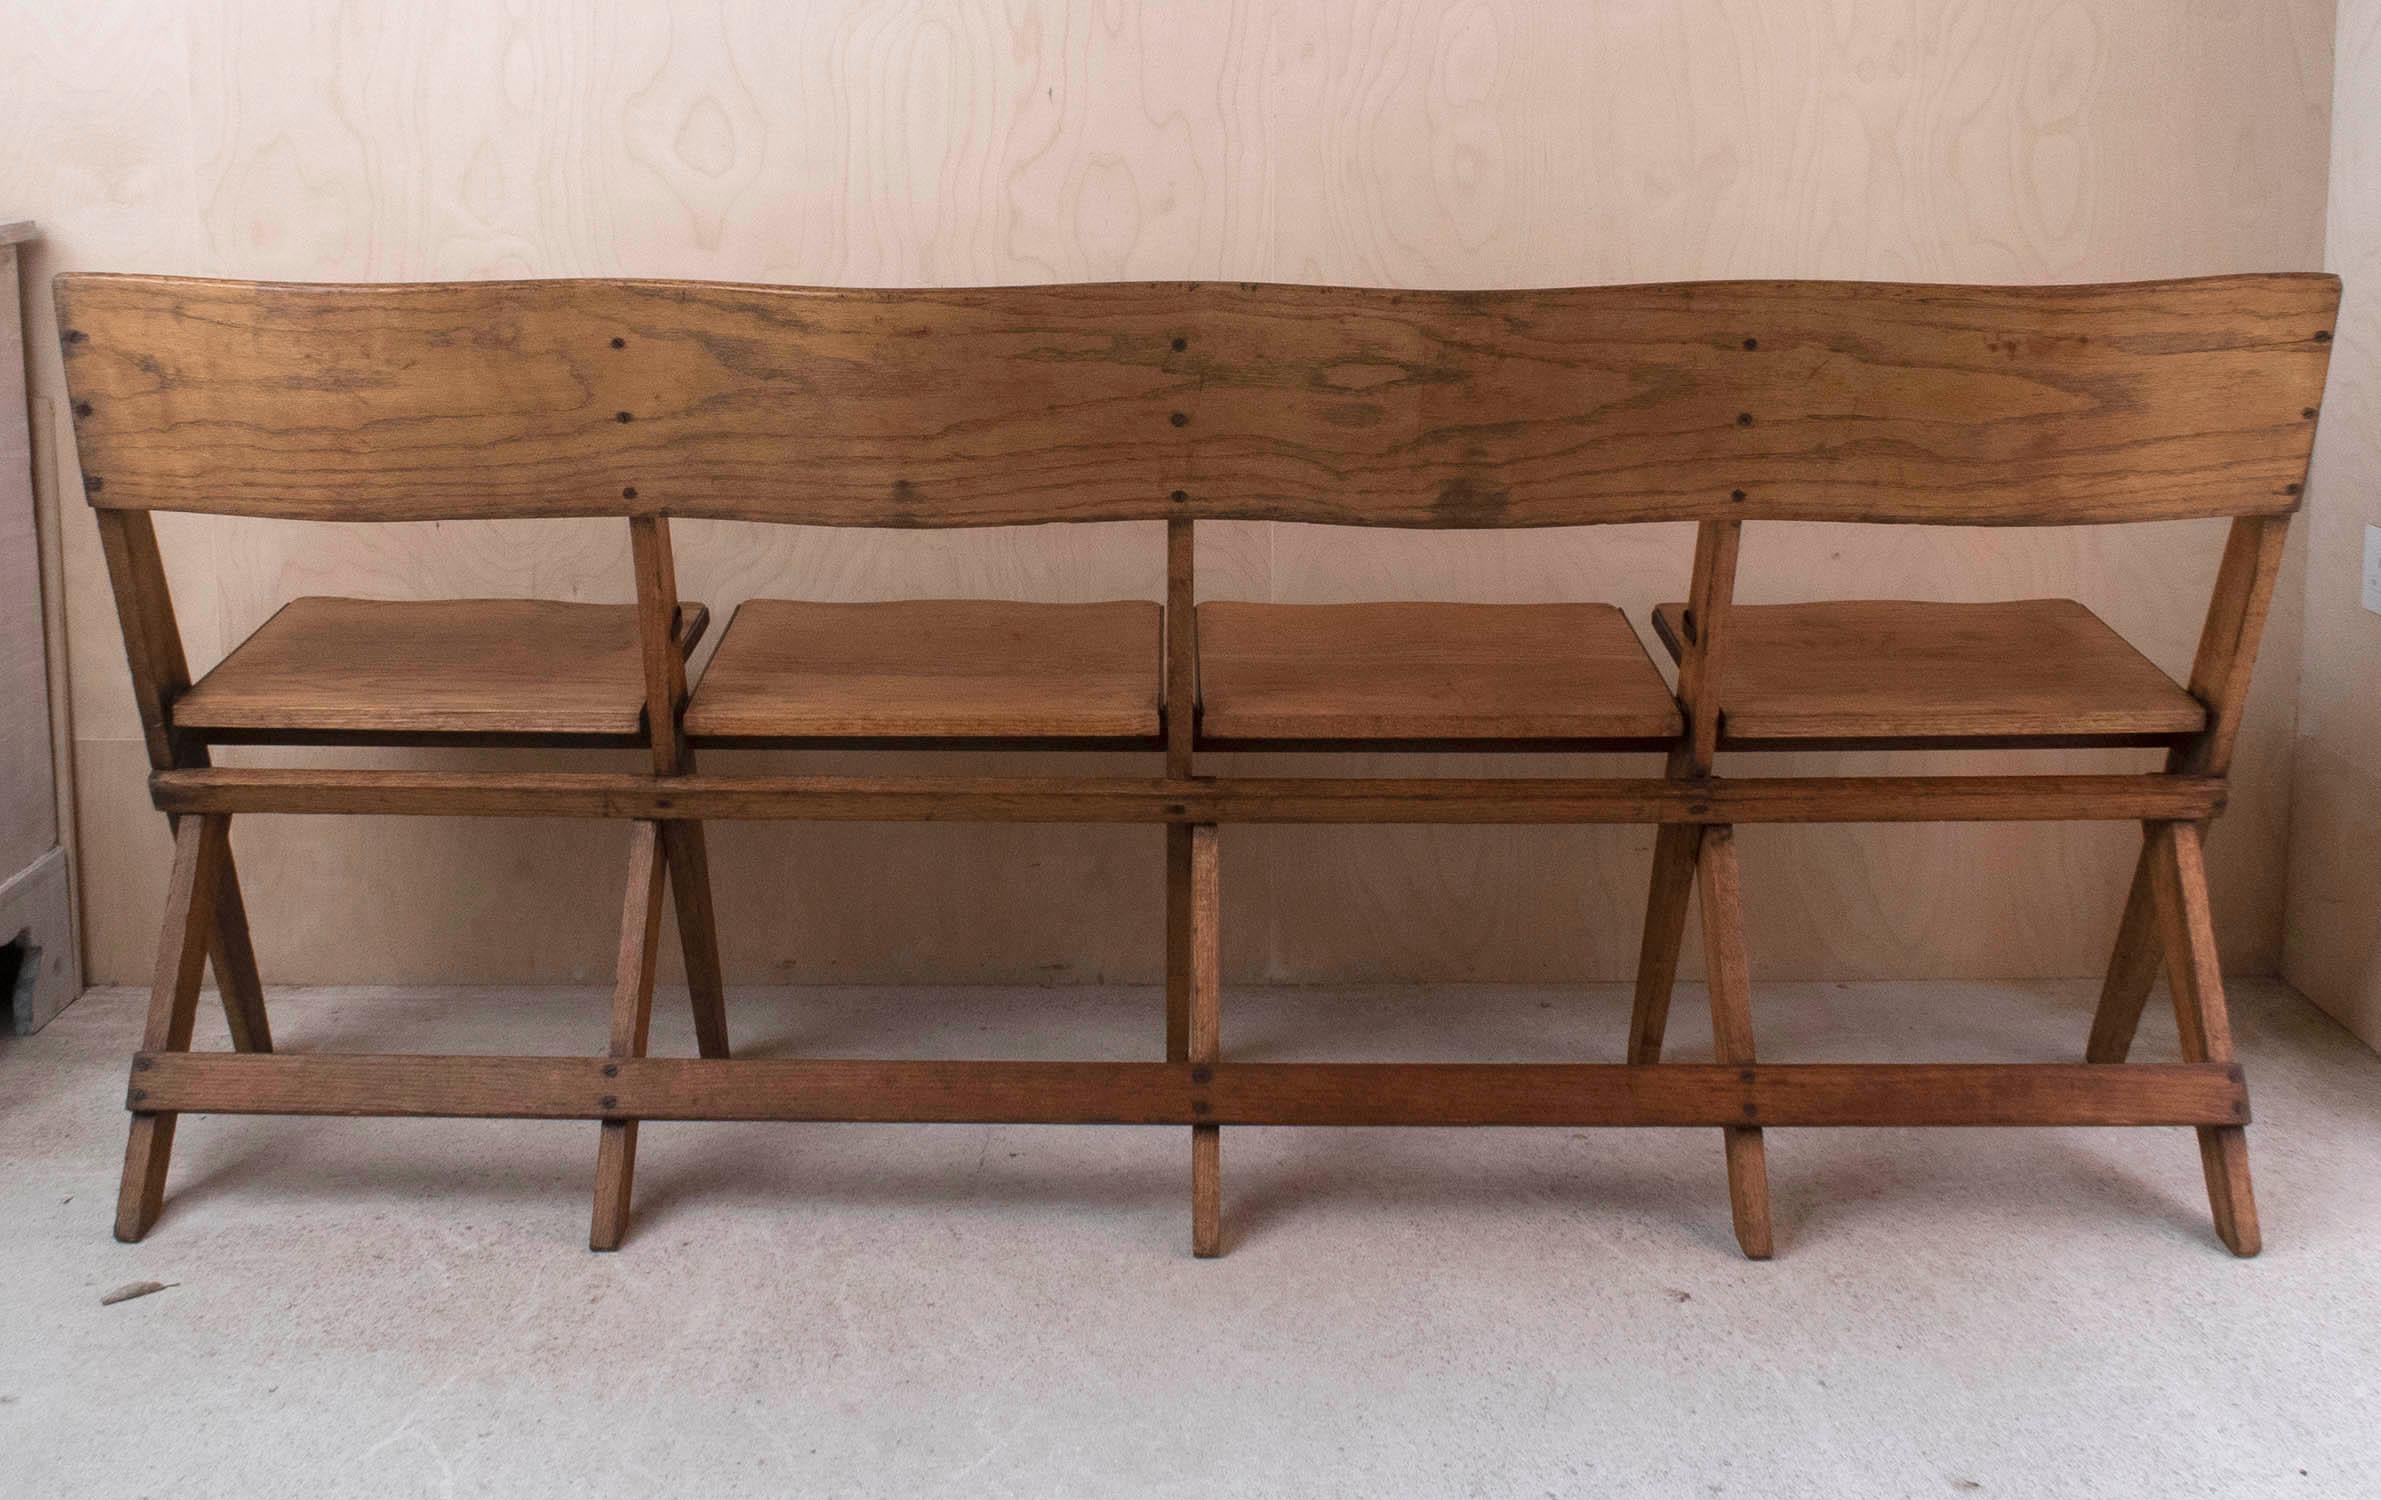 Vintage Campaign Folding Oak 4 Seater Bench. English C.1920 In Good Condition For Sale In St Annes, Lancashire